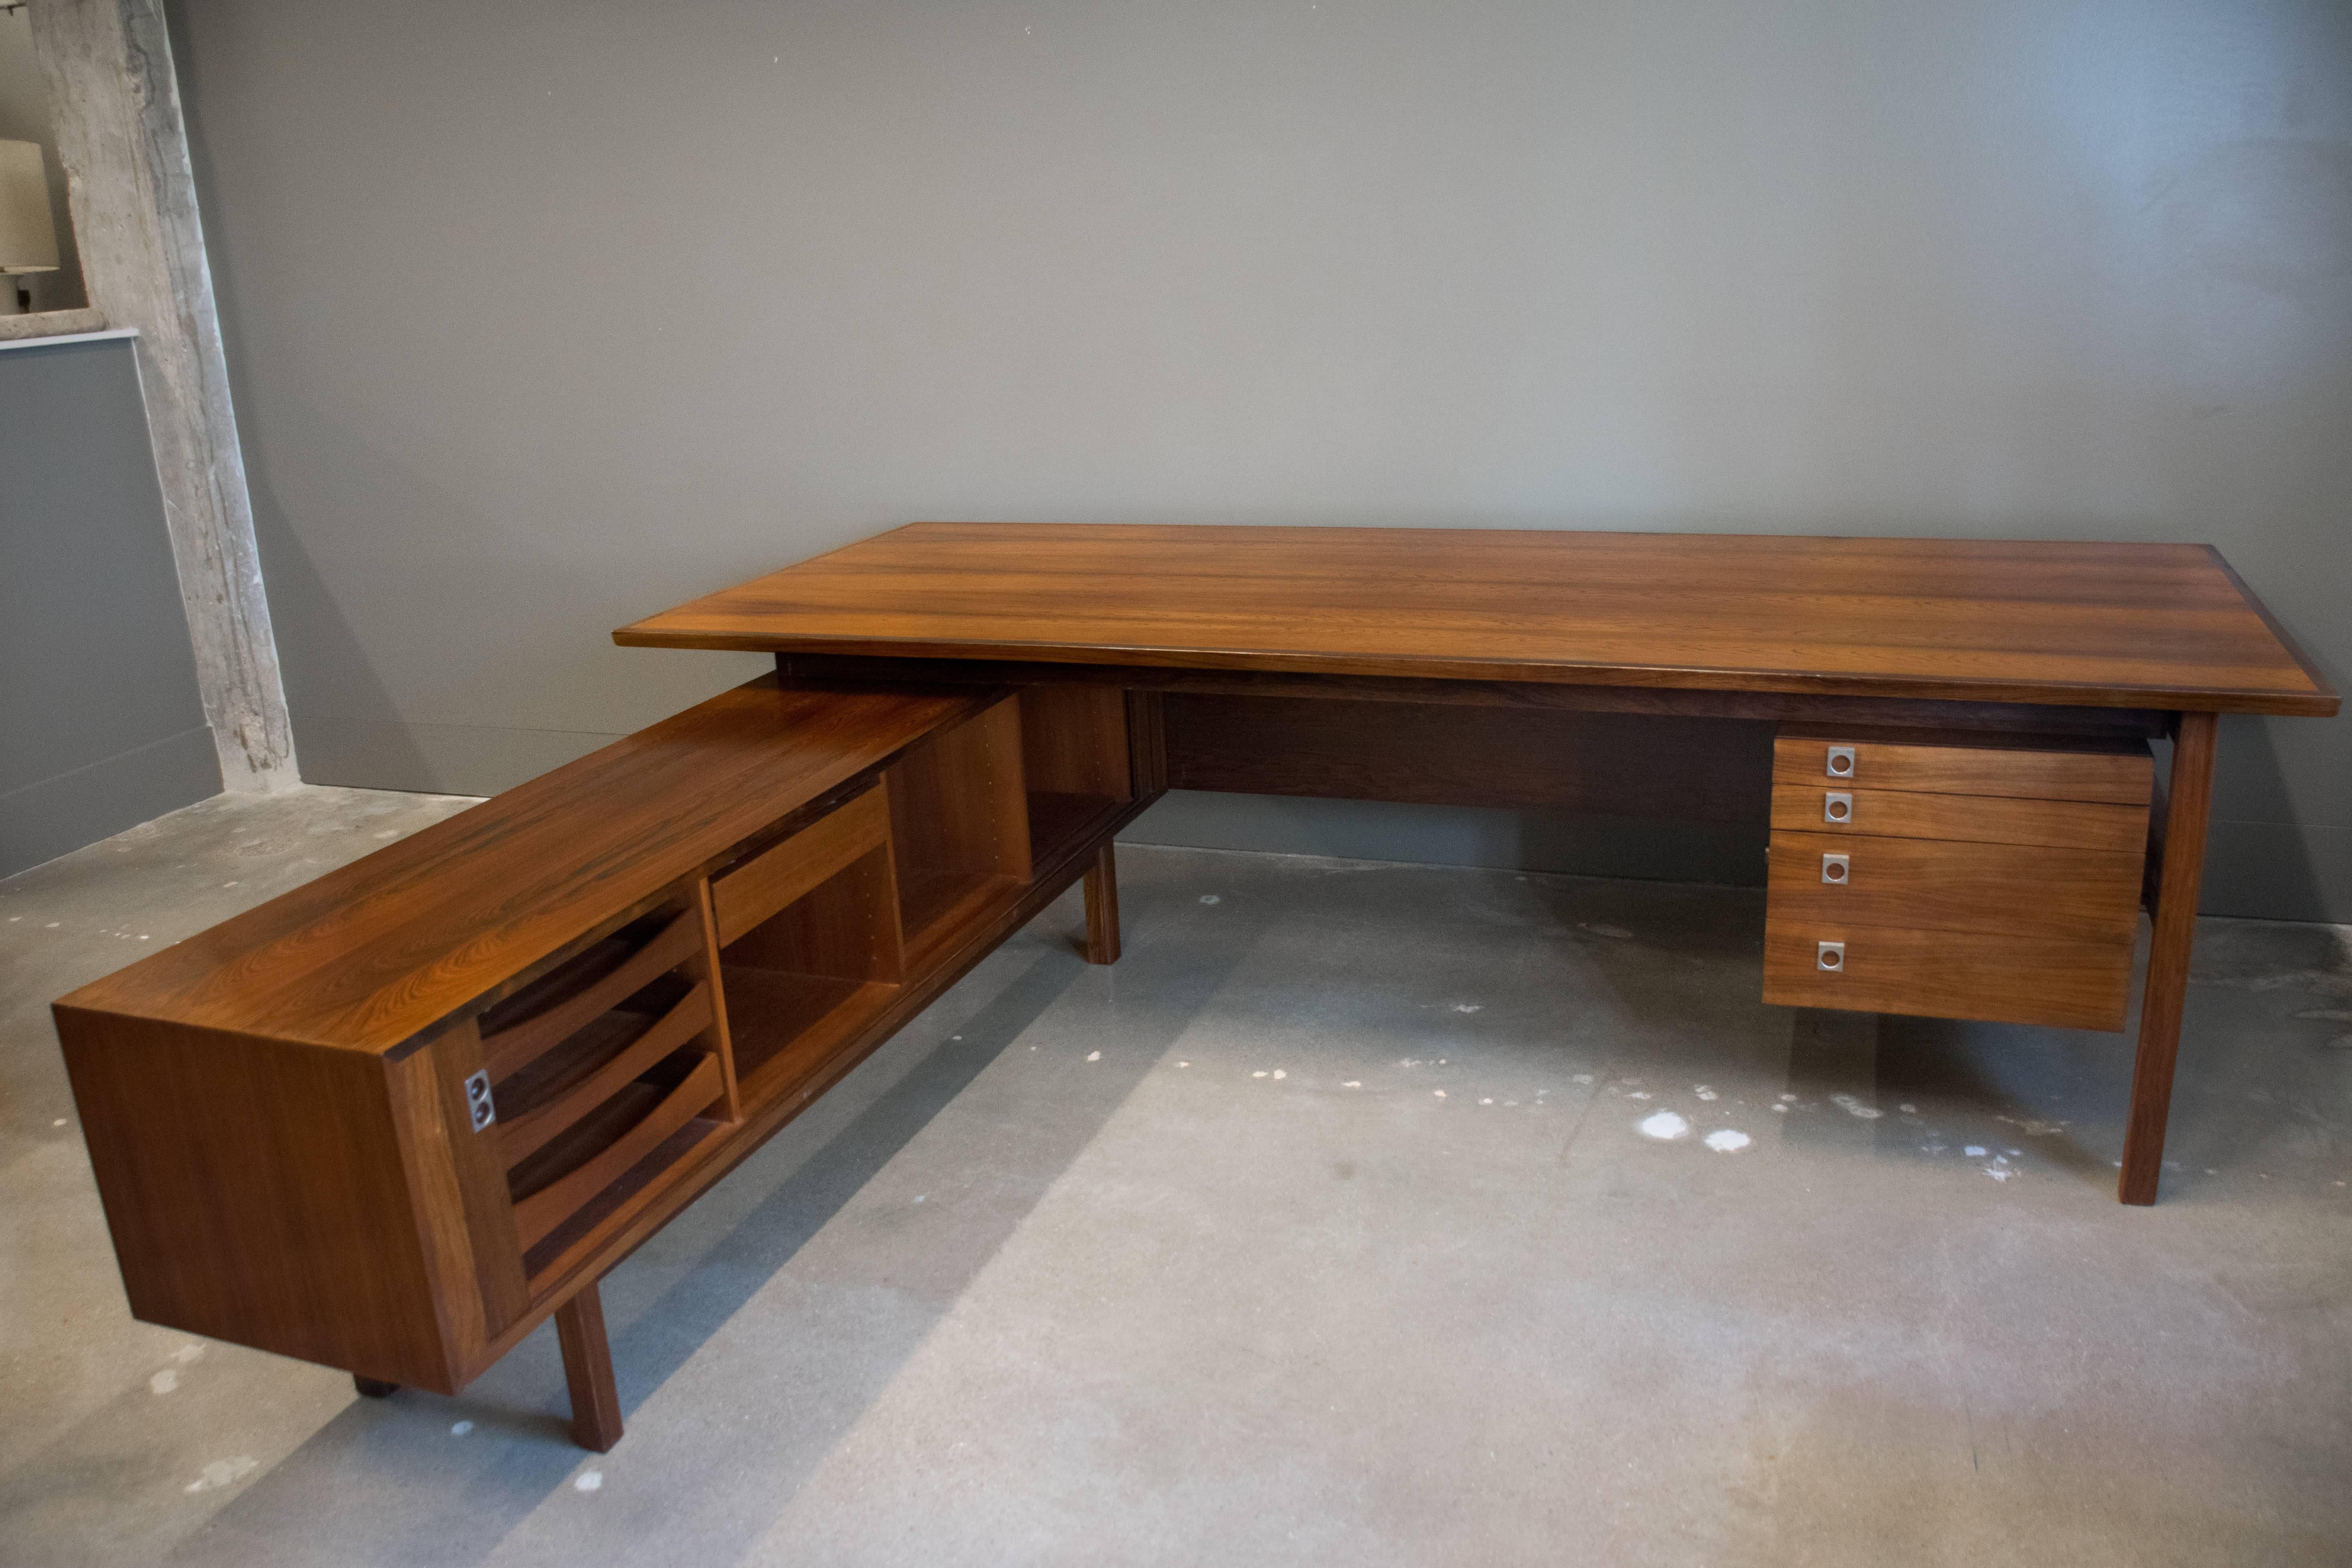 Danish MCM rosewood L-shaped executive desk, circa 1960, designed by Arne Vodder (Denmark, 1926-2009) for Sibast Furniture. L-shaped configuration. Primary desk with kneehole and stack of four drawers, credenza extension with dual tambour doors